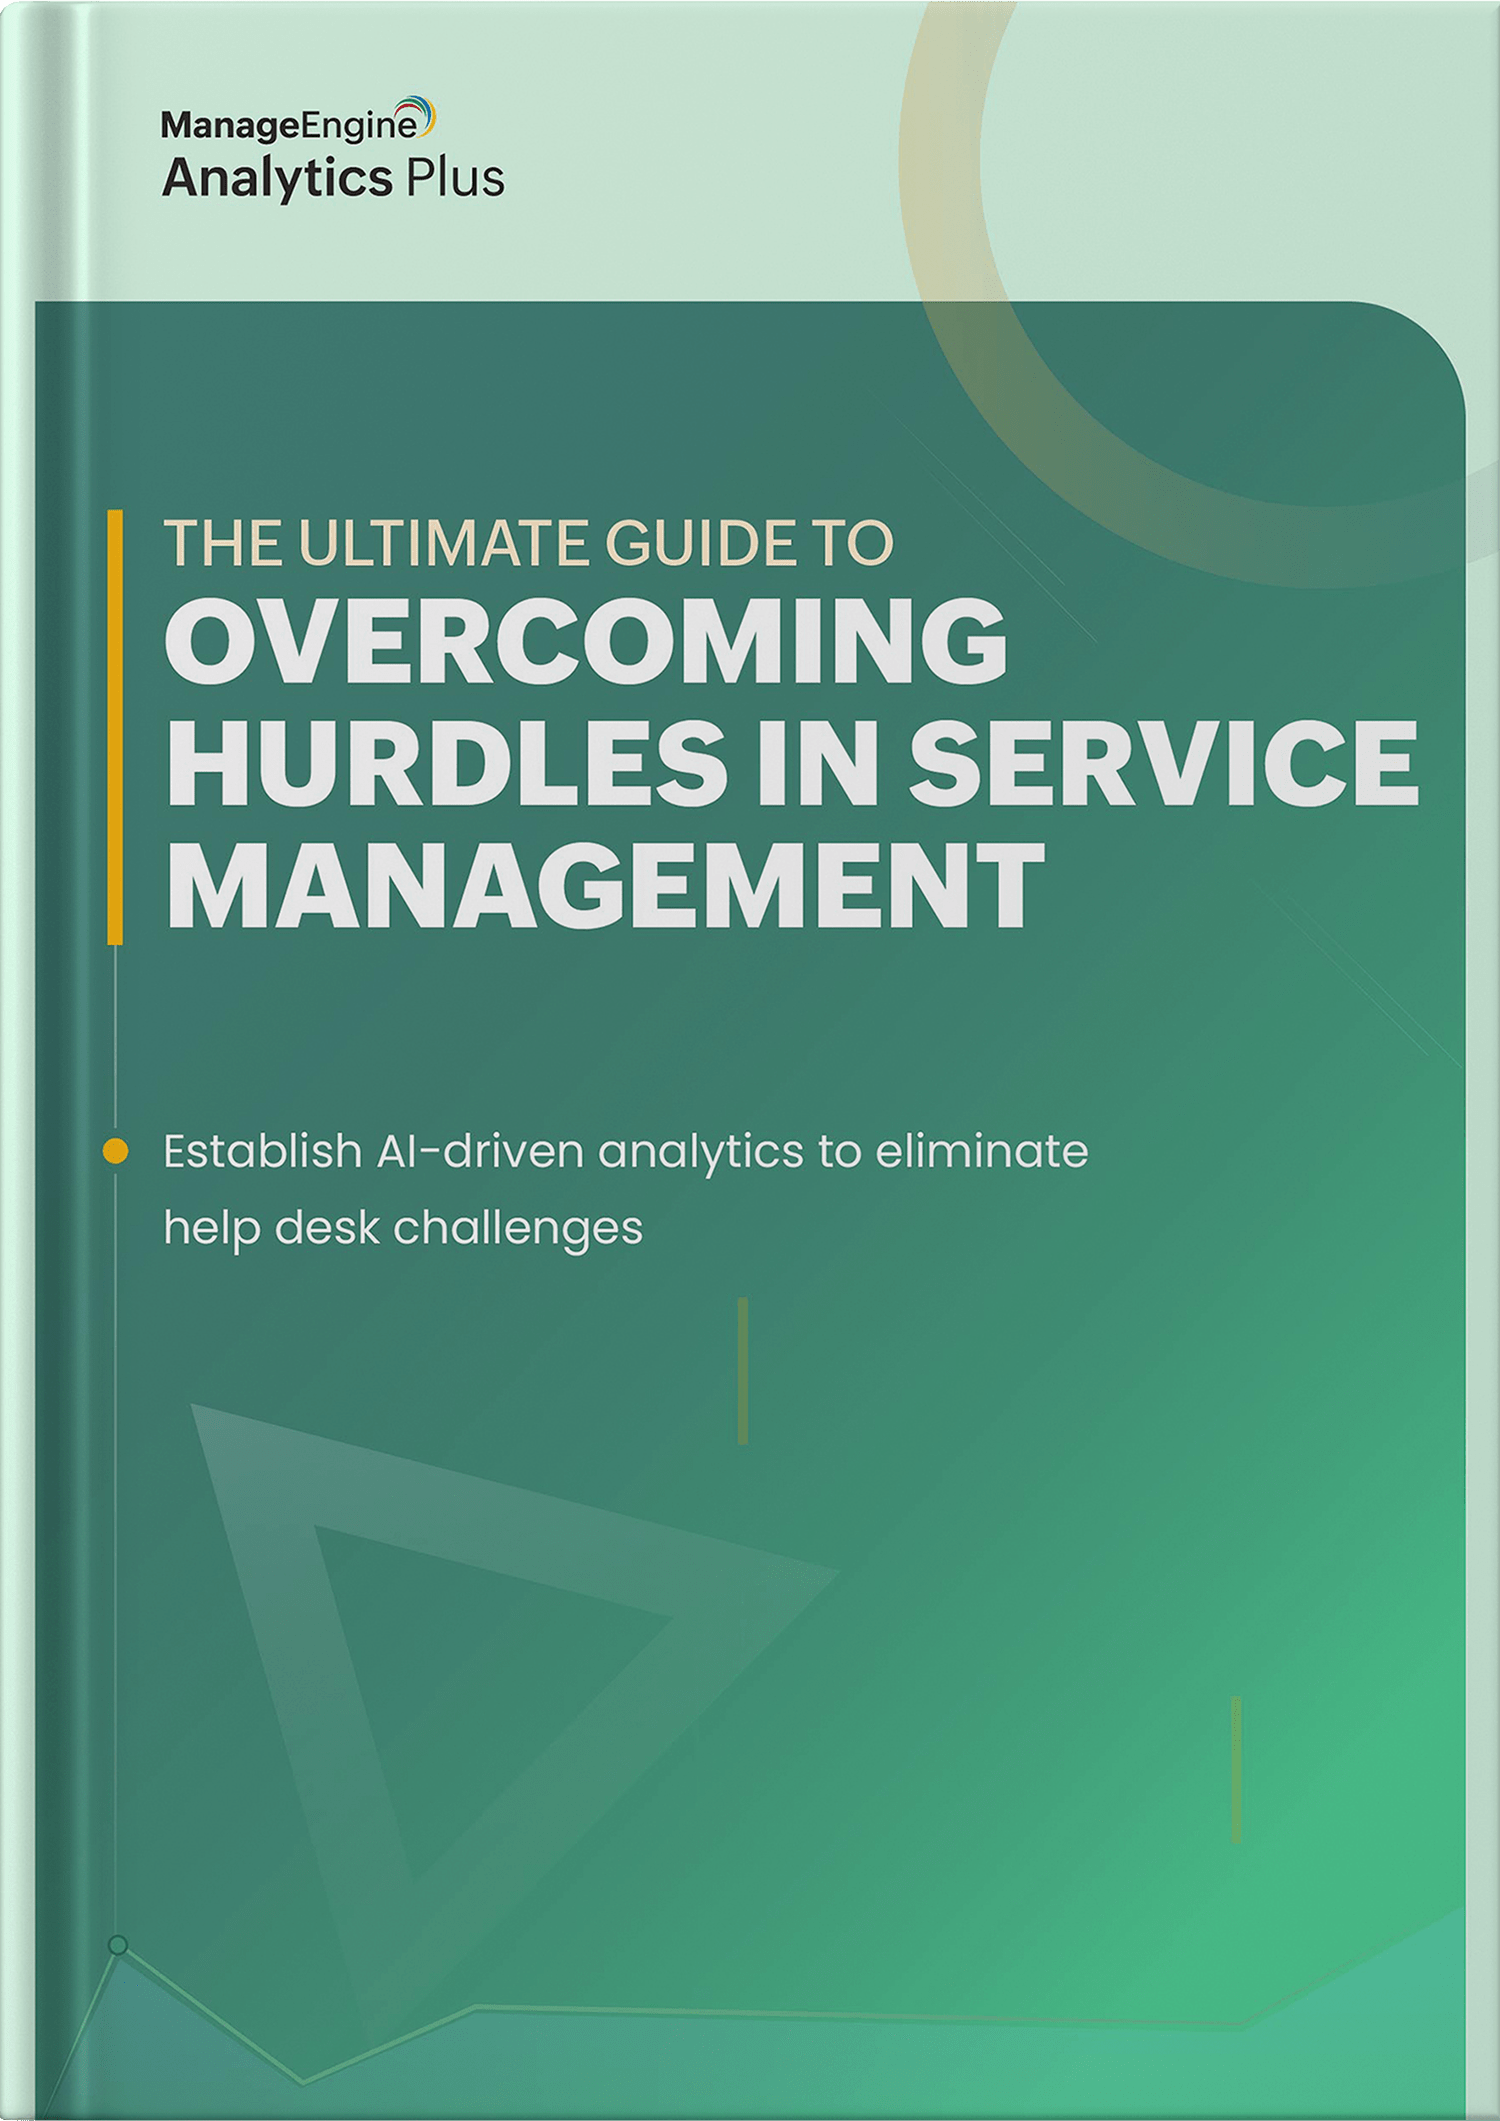 The ultimate guide to overcoming hurdles in service management